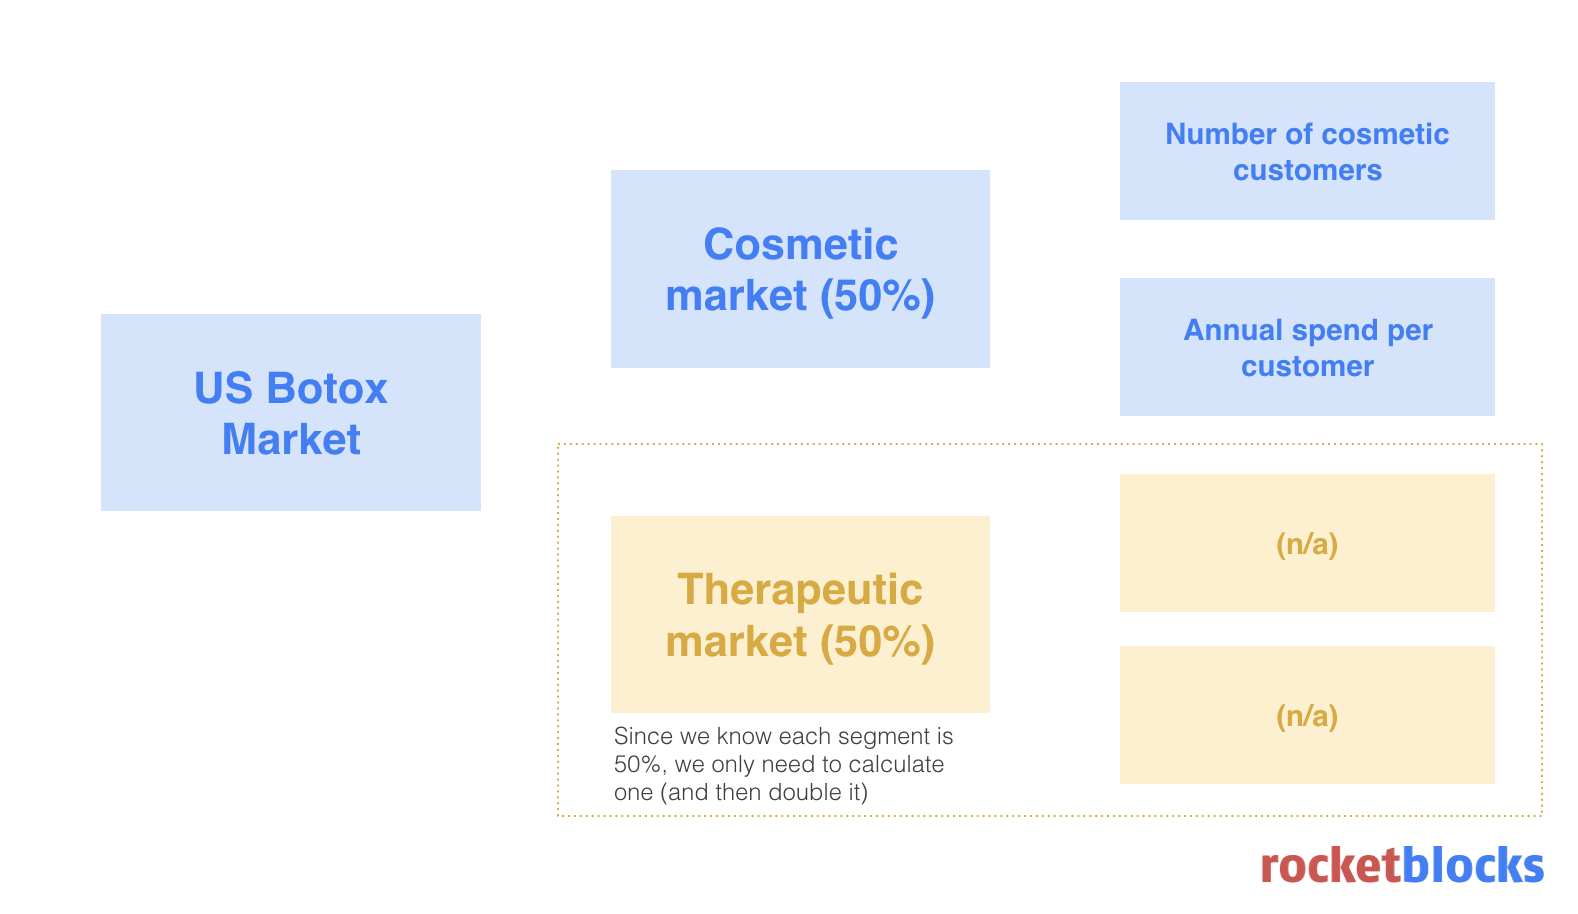 Example of how to structure a market sizing question about the US Botox market